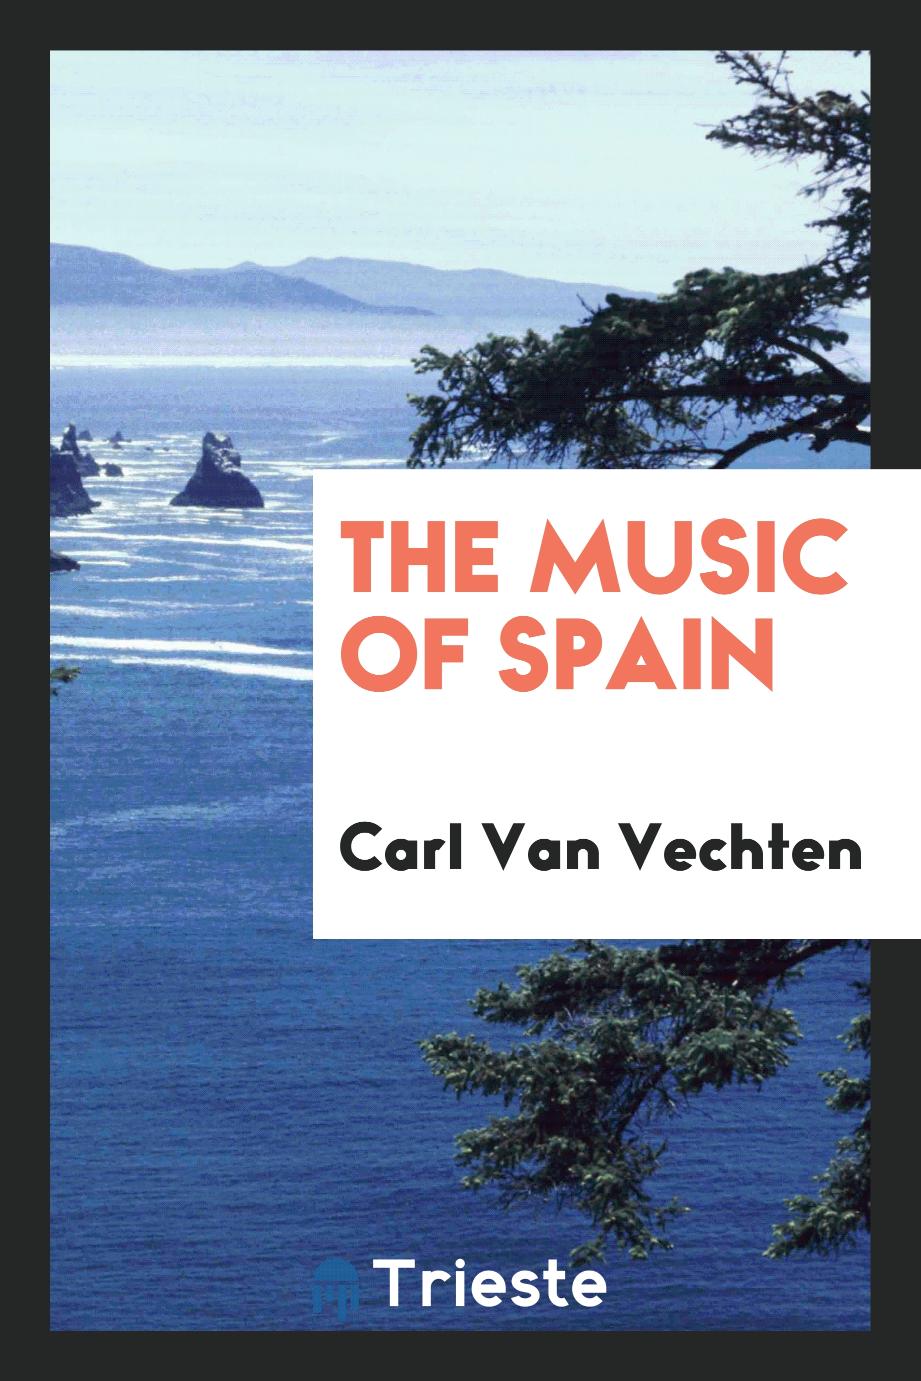 The music of Spain